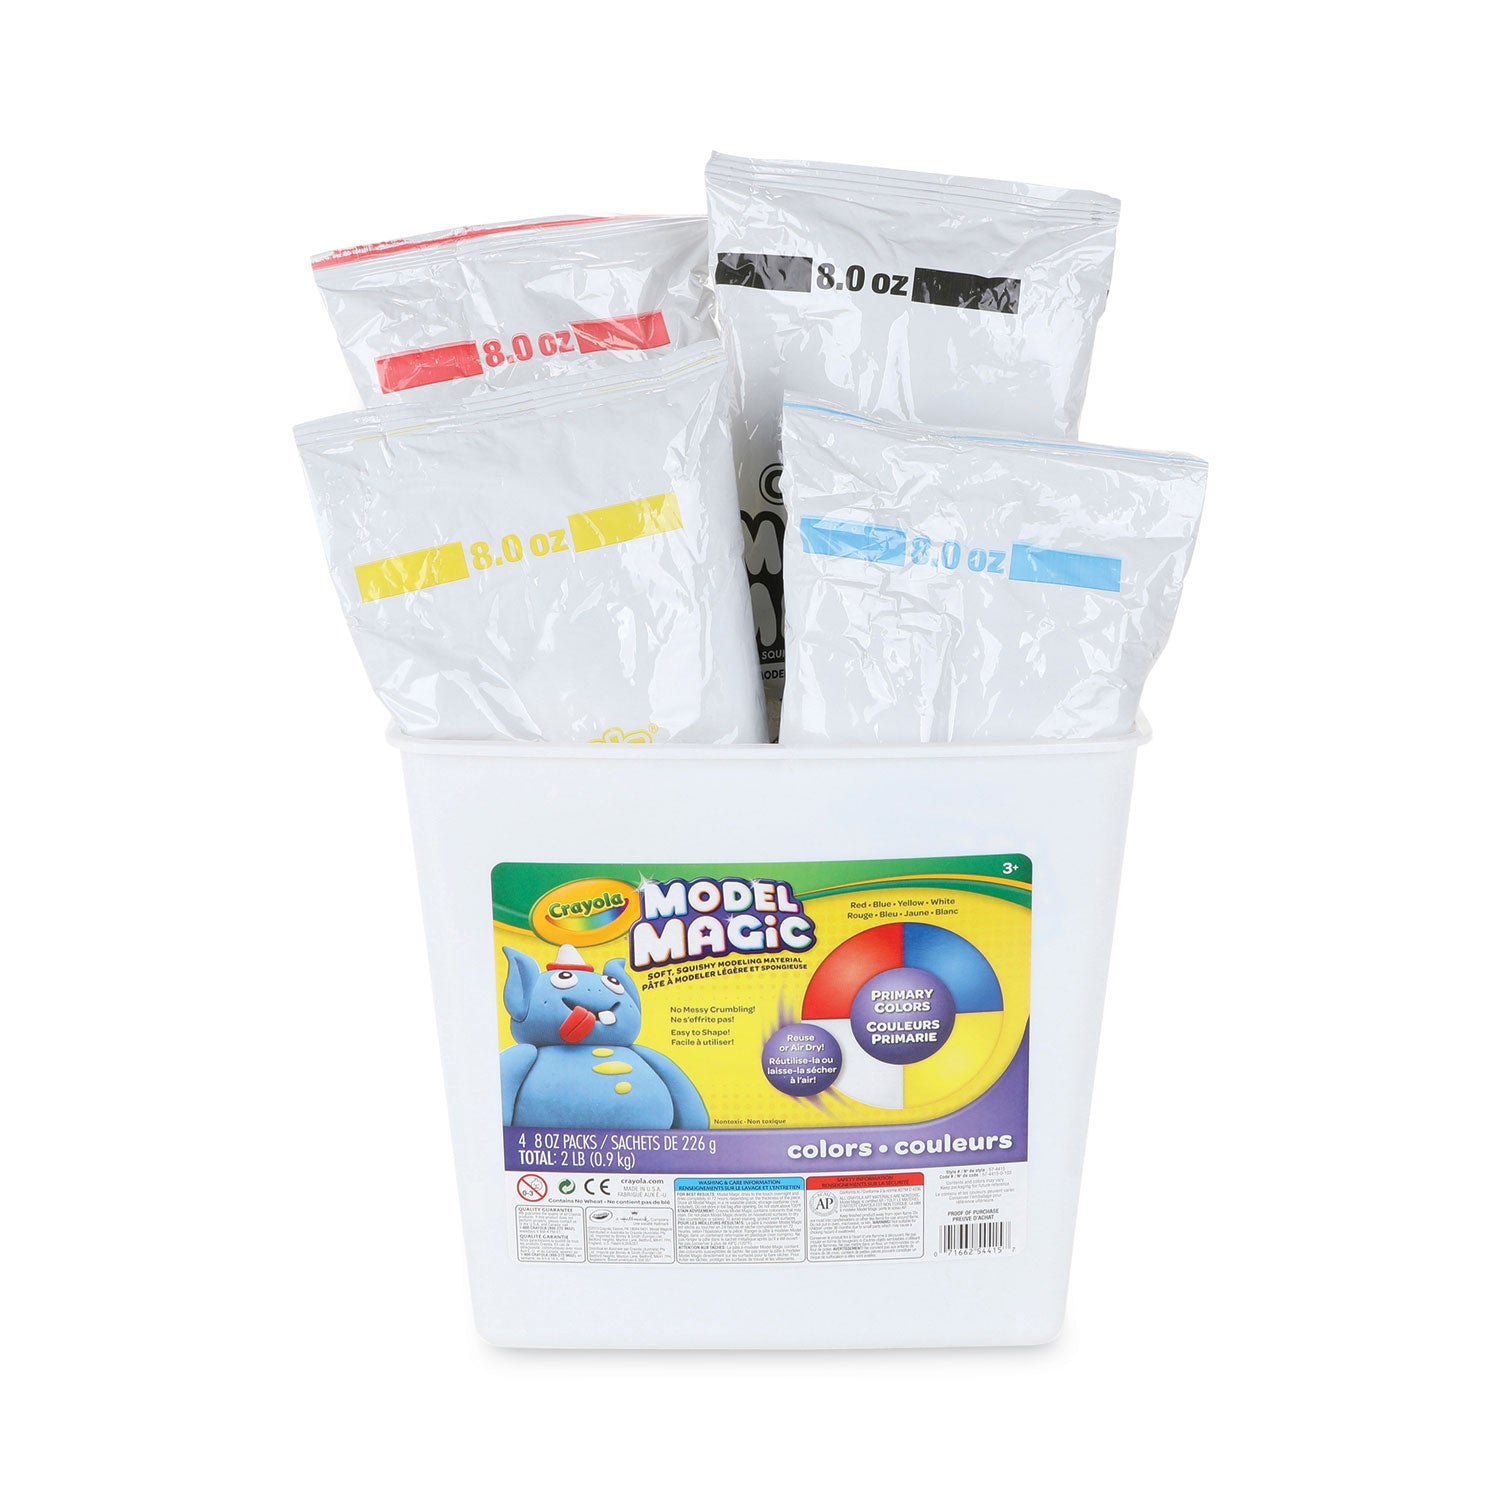 Model Magic Modeling Compound, 8 oz Packs, 4 Packs, Blue, Red, White, Yellow, 2 lbs - 